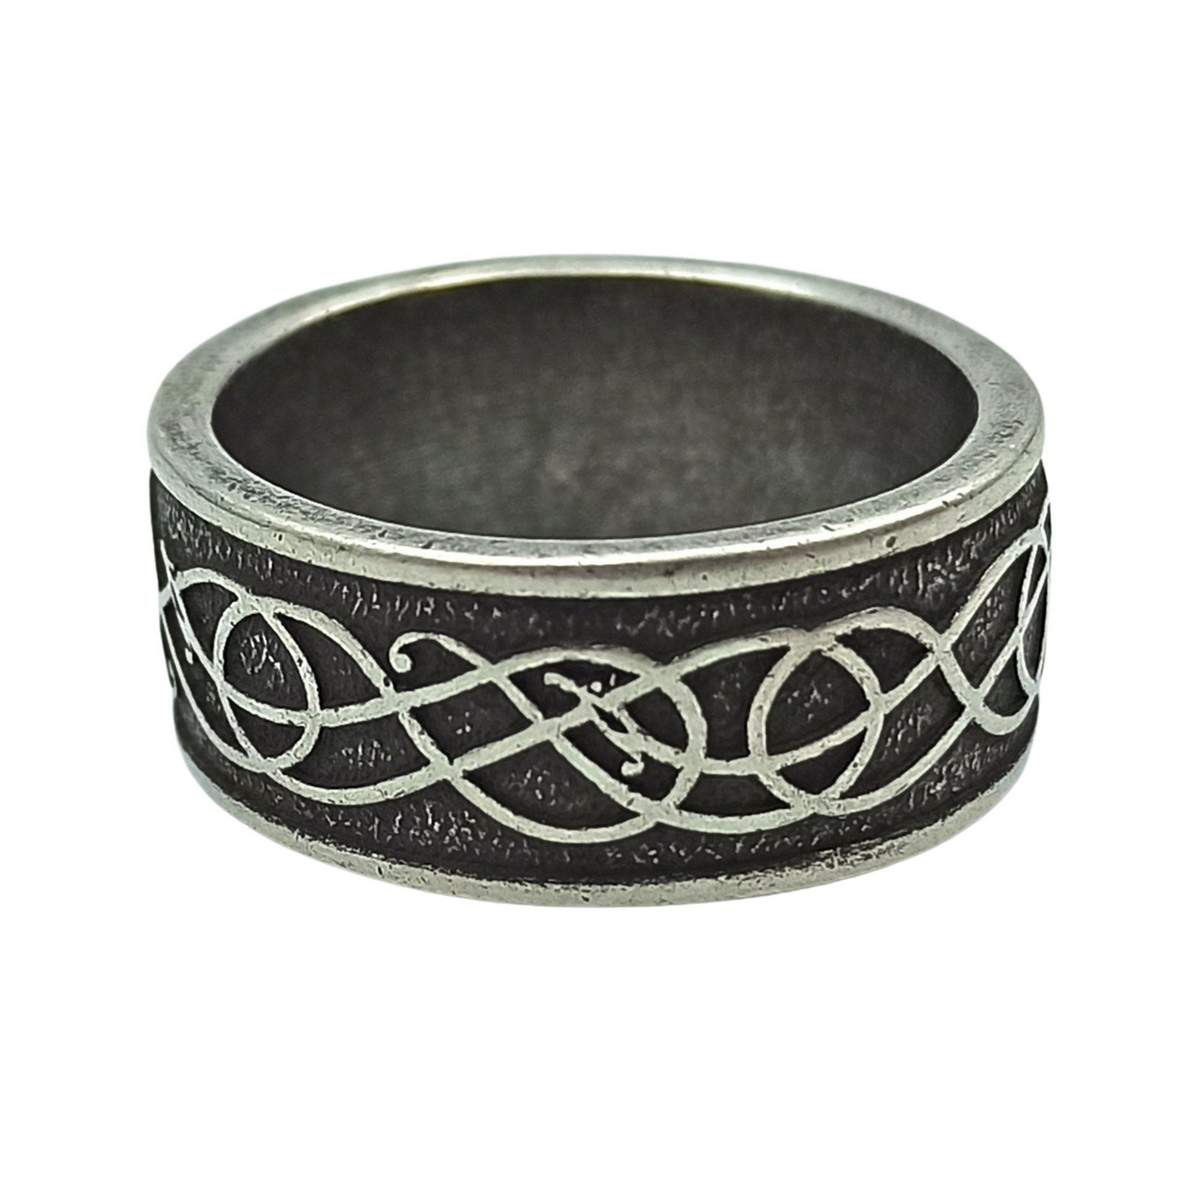 Norse Urnes ornament rings from bronze 6 US Silver plating 